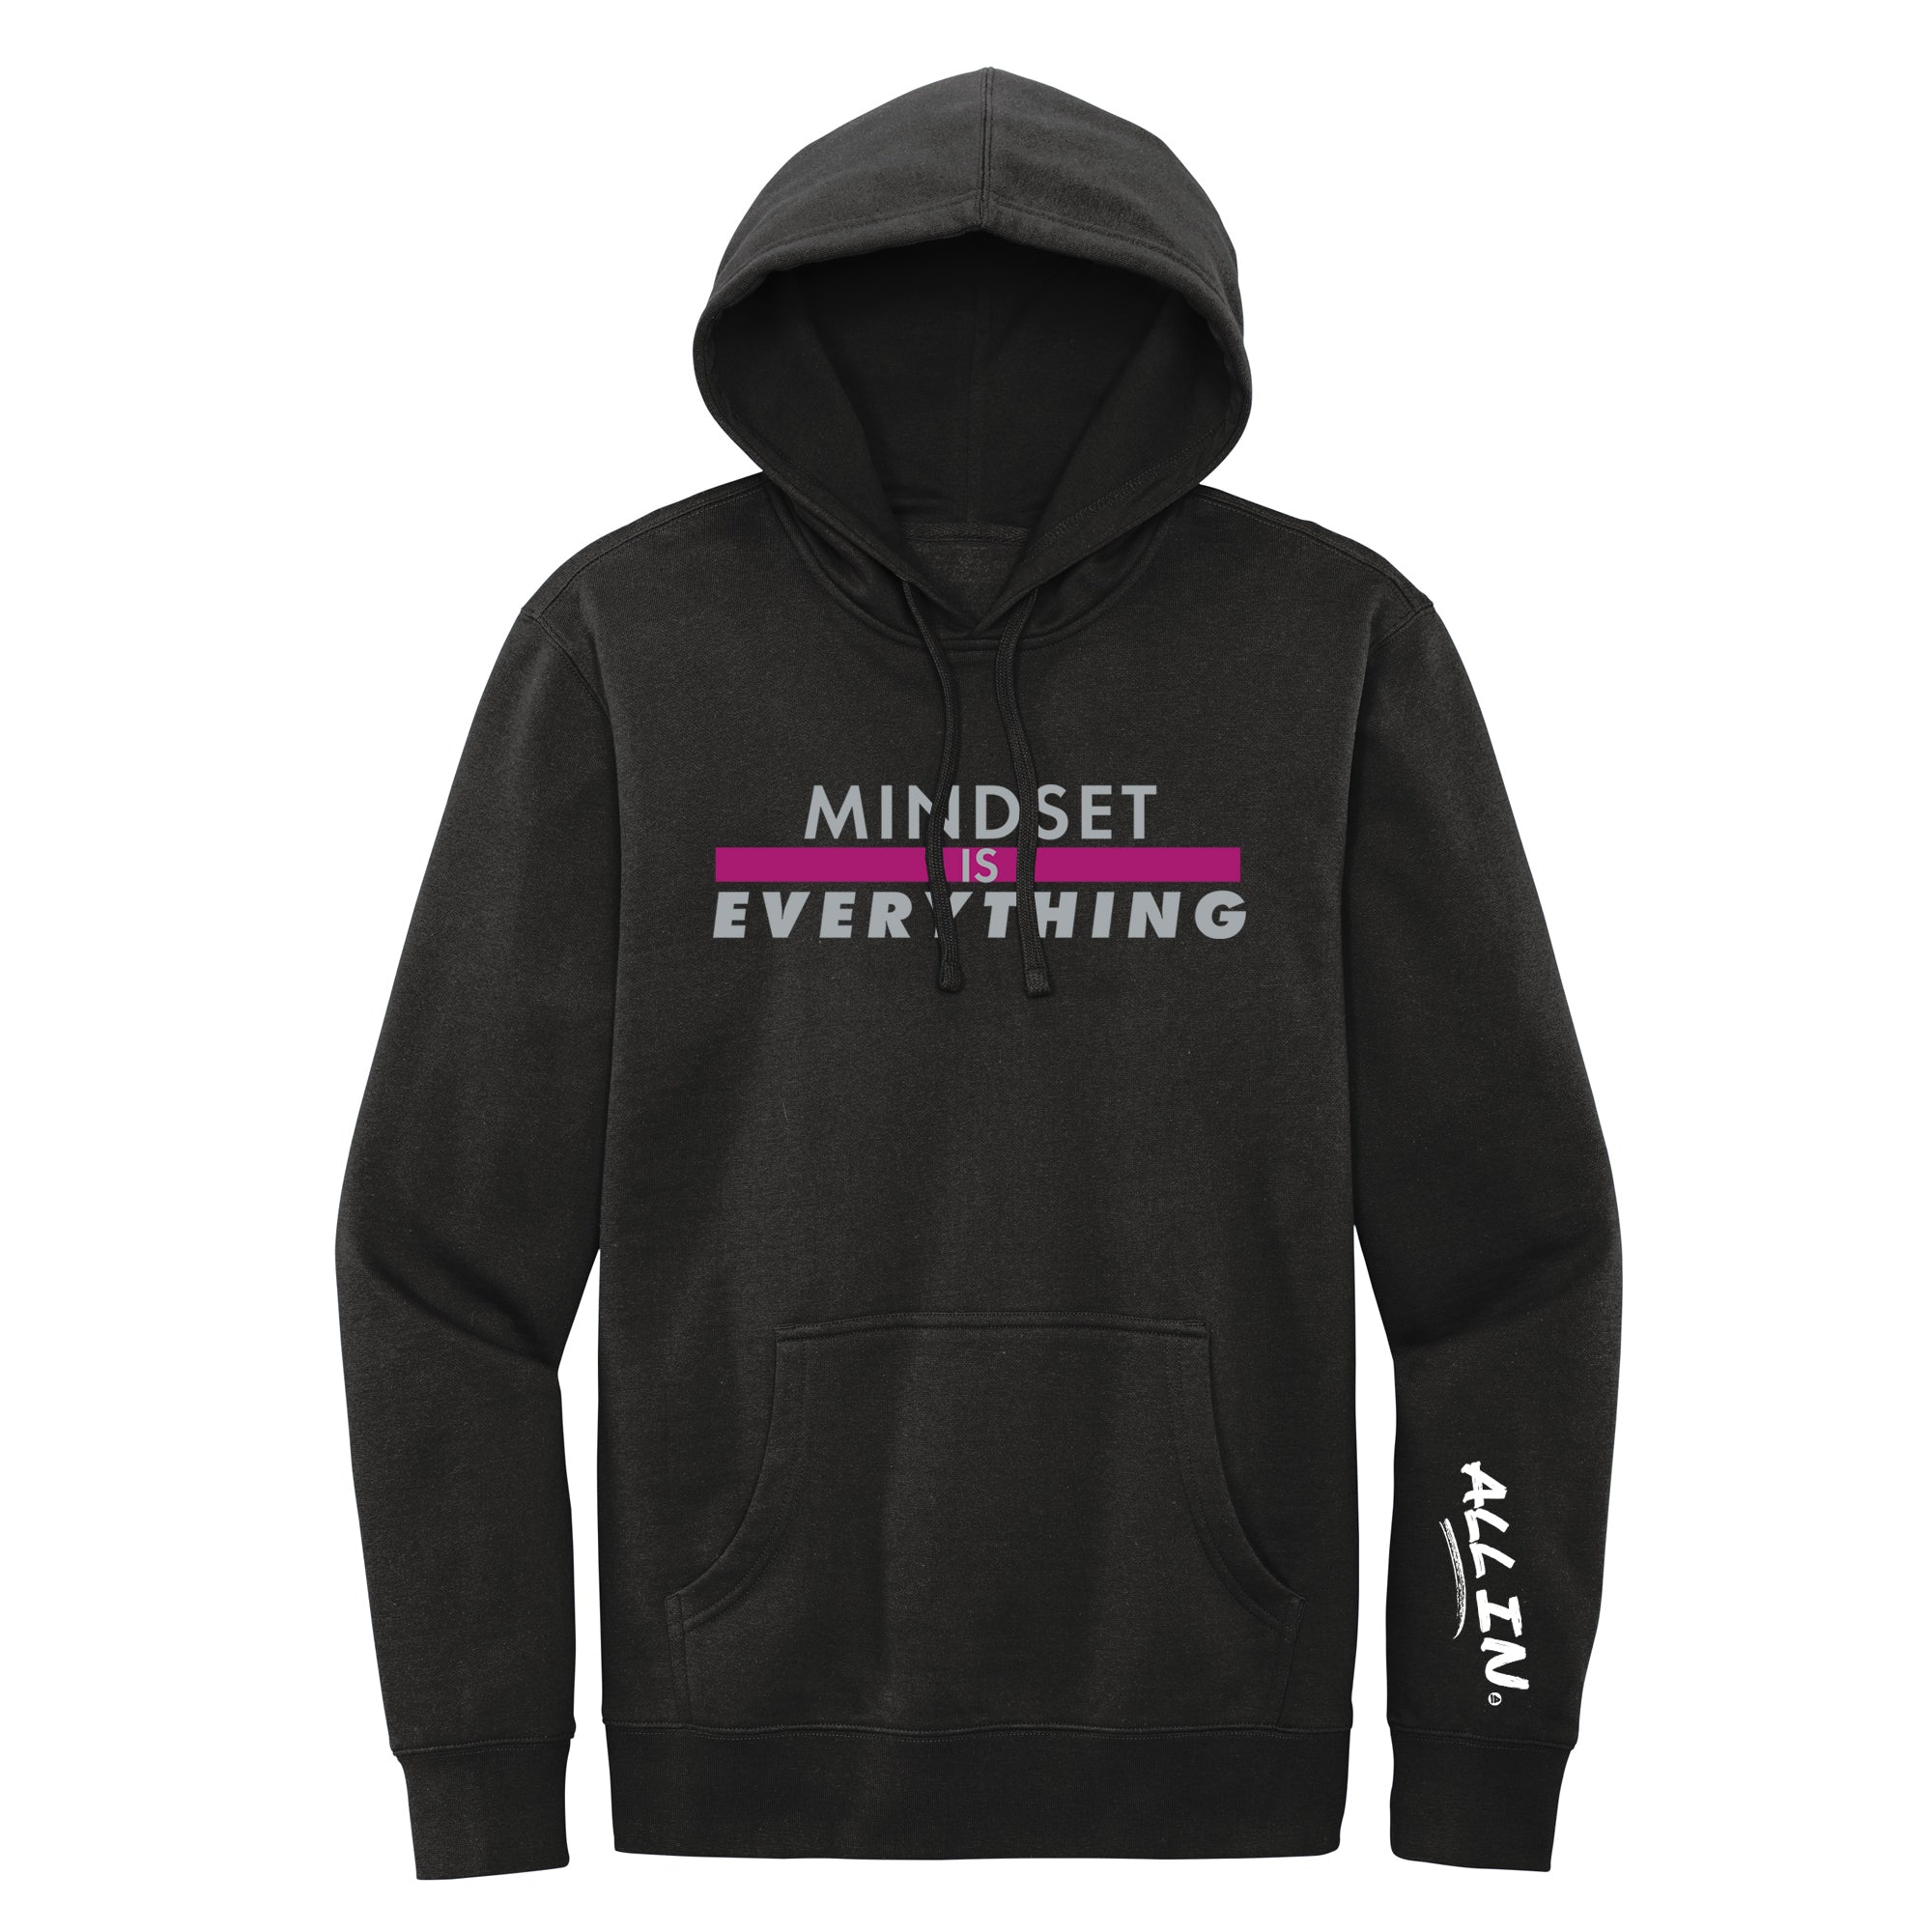 "Mindset is Everything" Hoodie- Benefitting the Society for Prevention and Teen Suicide.